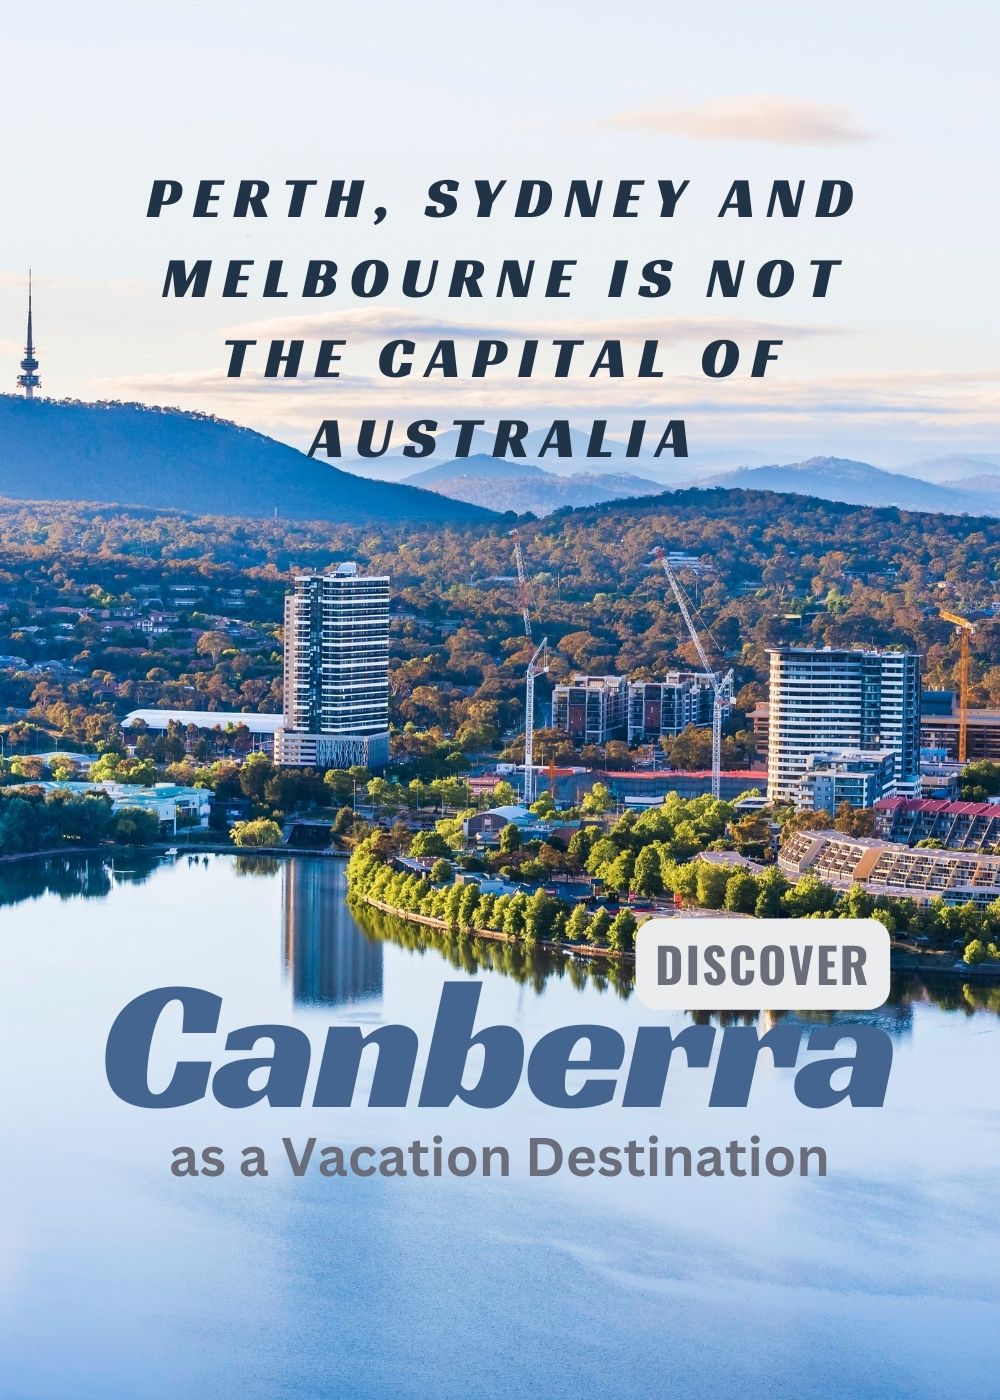 the capital of Australia Canberra as a vacation destination where to stay things to do family friendly